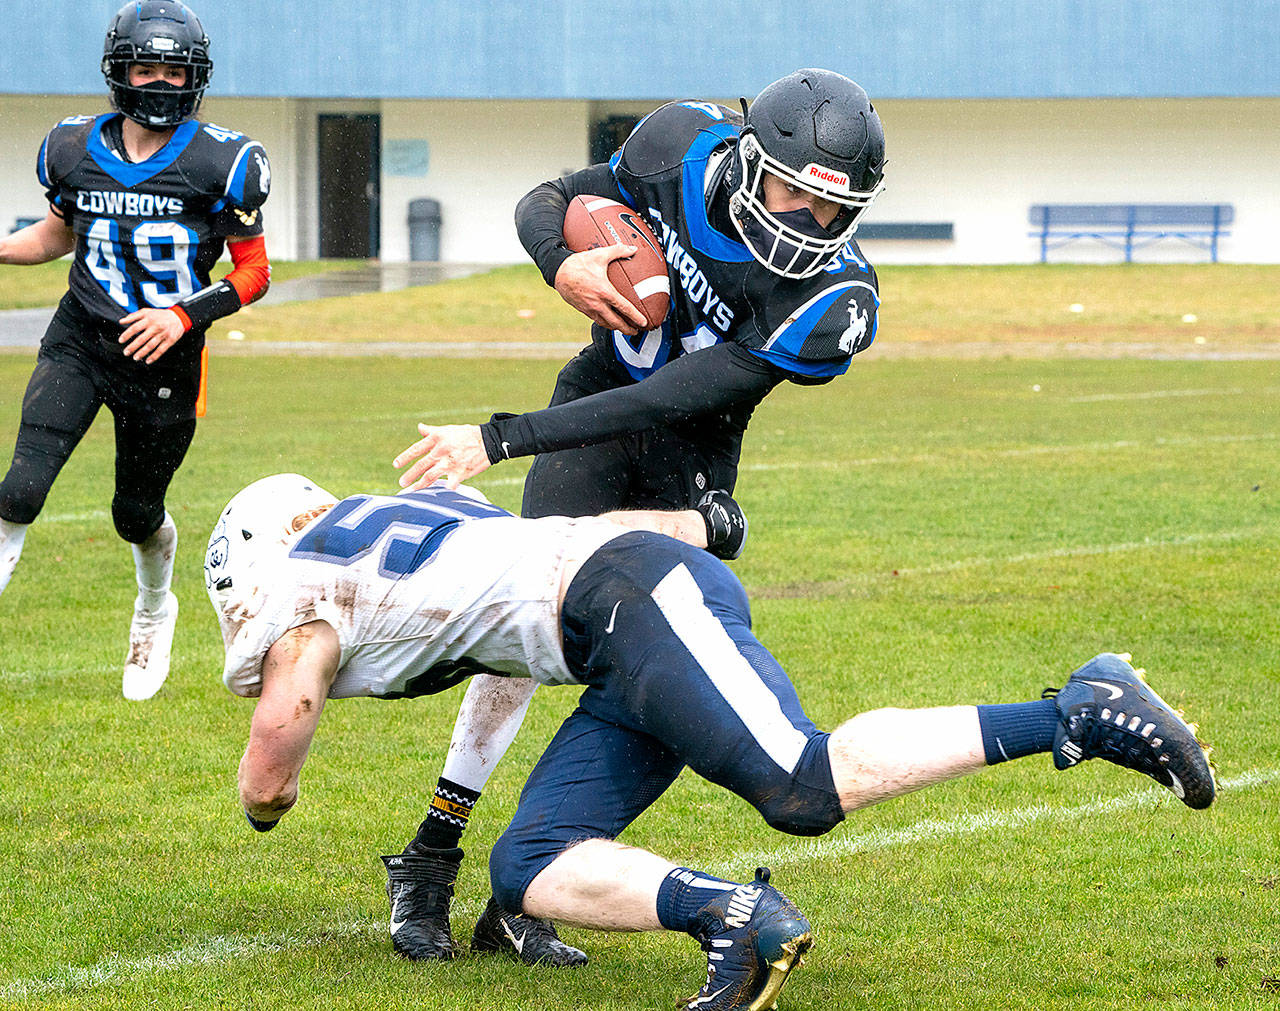 East Jefferson’s Lonnie Kenney (49) watches as teammate Logan Massie (34) pivots around Cascade Christian’s Ryan Hersey to pick up yardage in a game played in Chimacum on Saturday. (Steve Mullensky/for Peninsula Daily News)